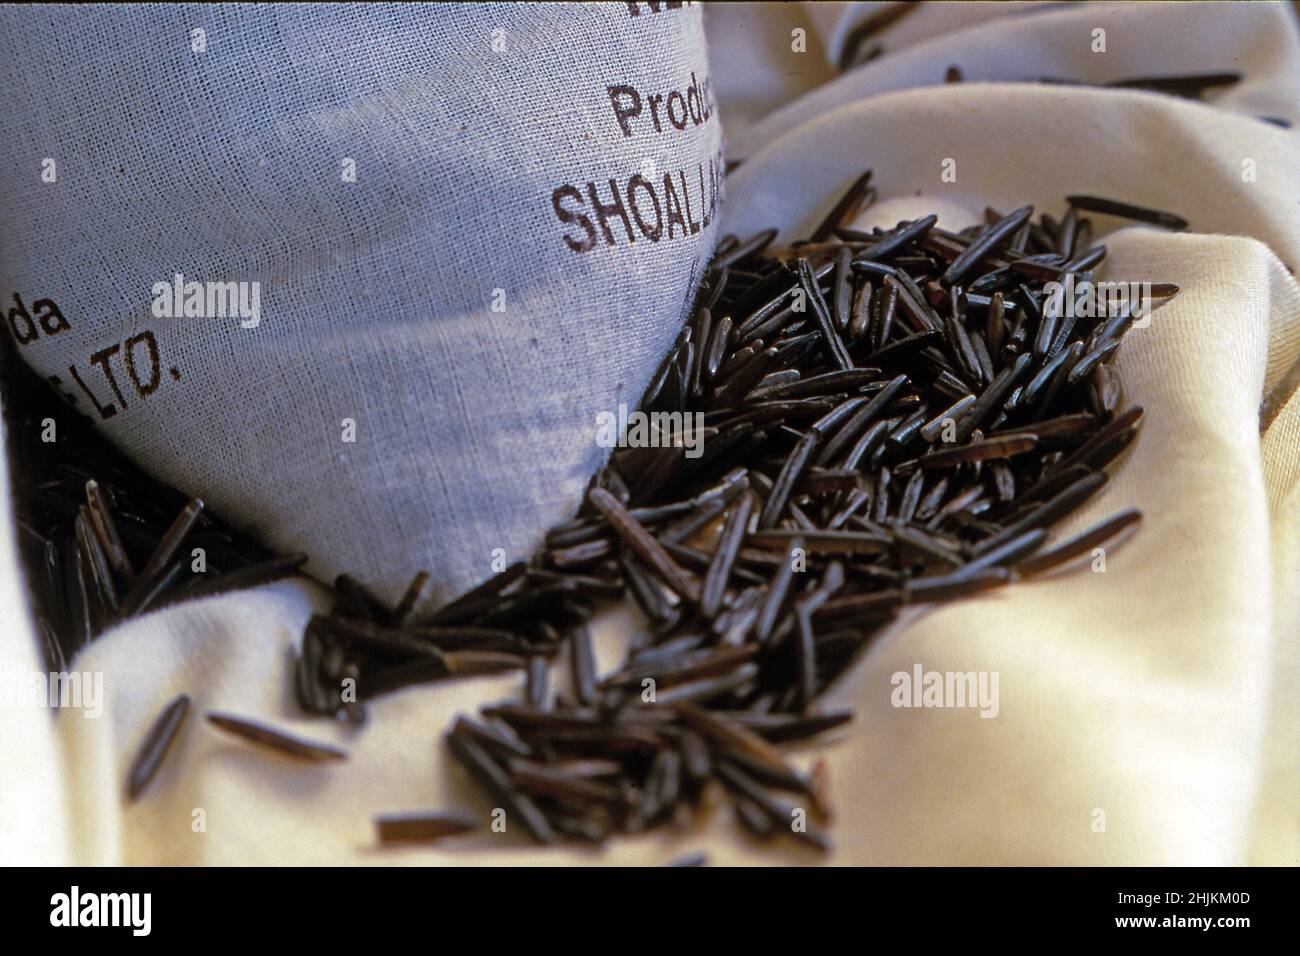 Northern Wild Rice (Zizania palustris) is a wild marsh grass that is native to the aquatic areas of the boreal forest regions of Alberta, Saskatchewan Stock Photo